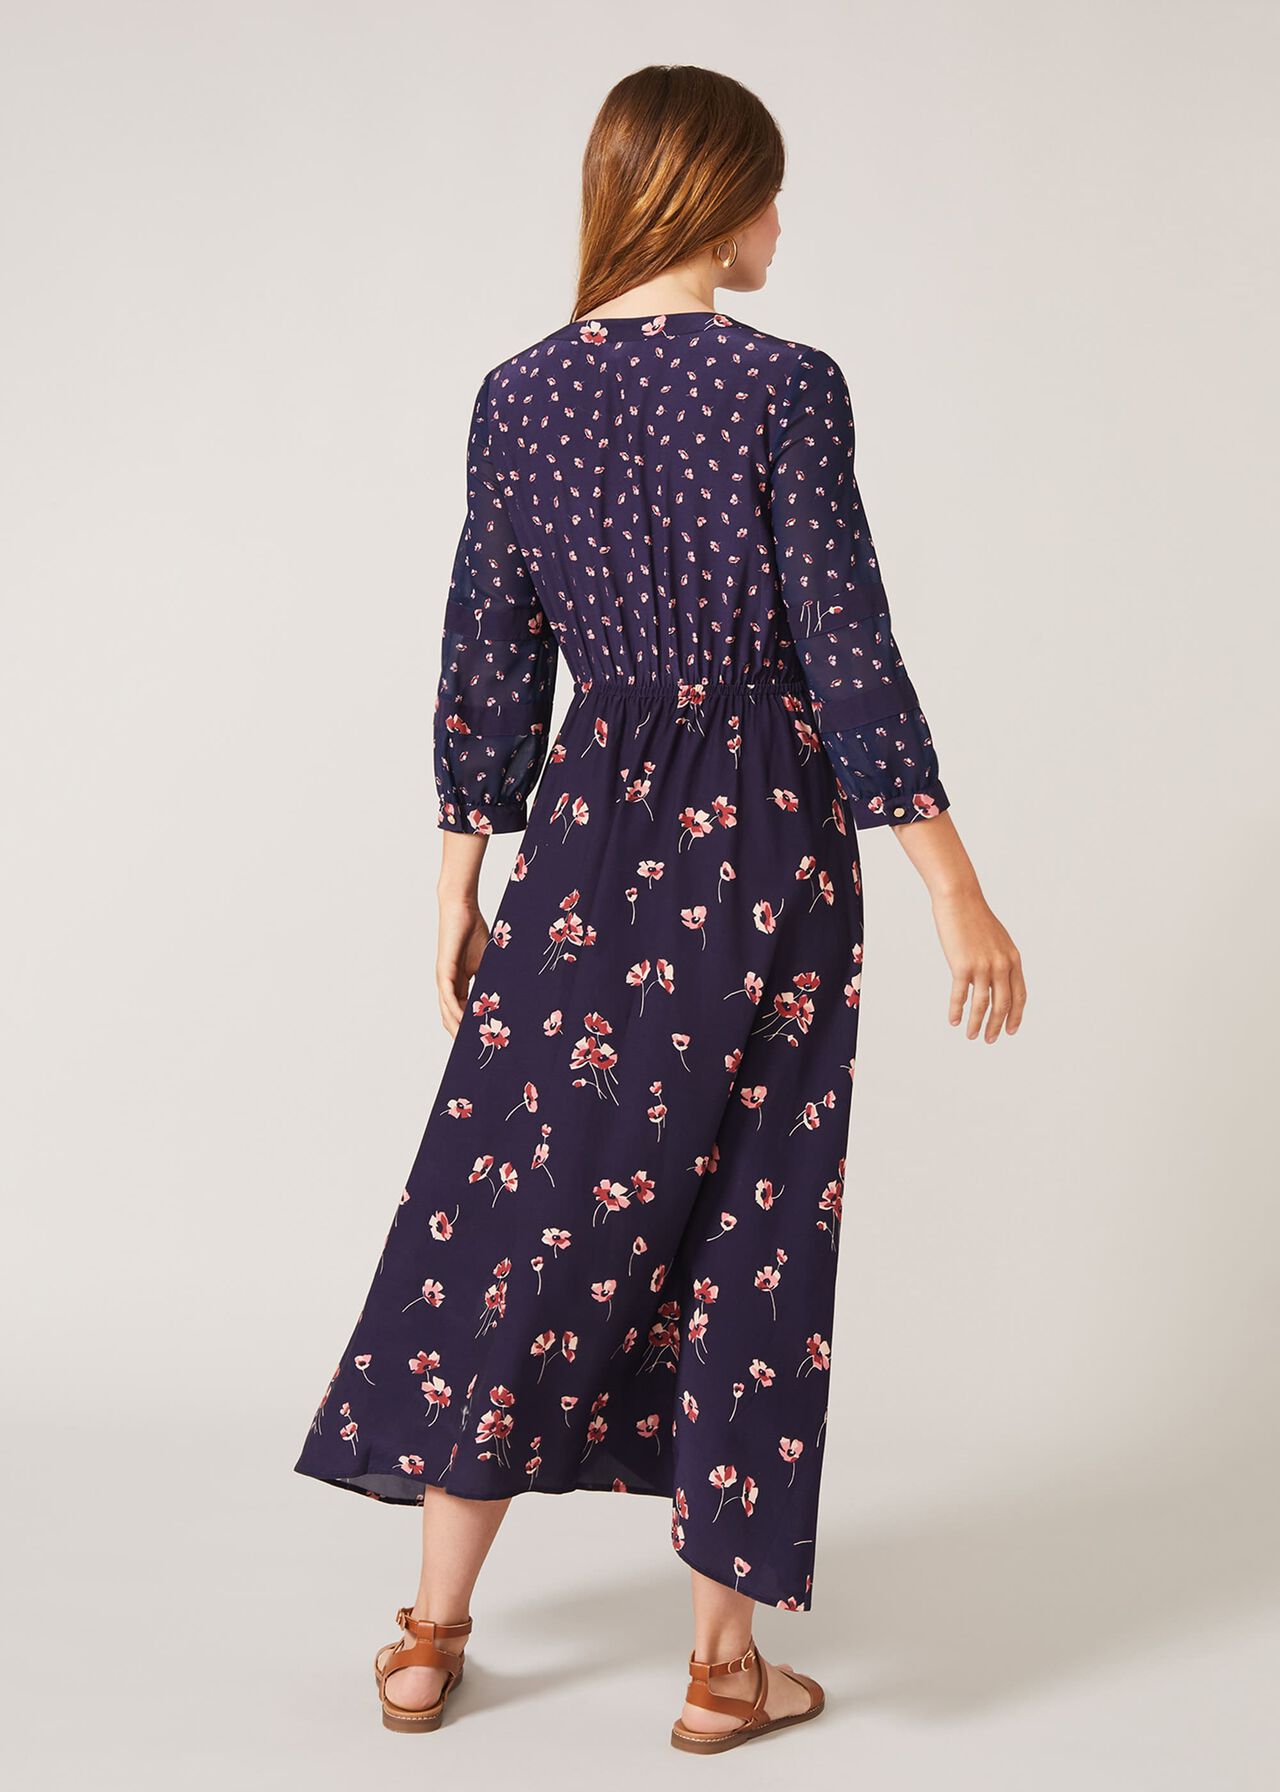 Anemone Mixed Floral Print Dress